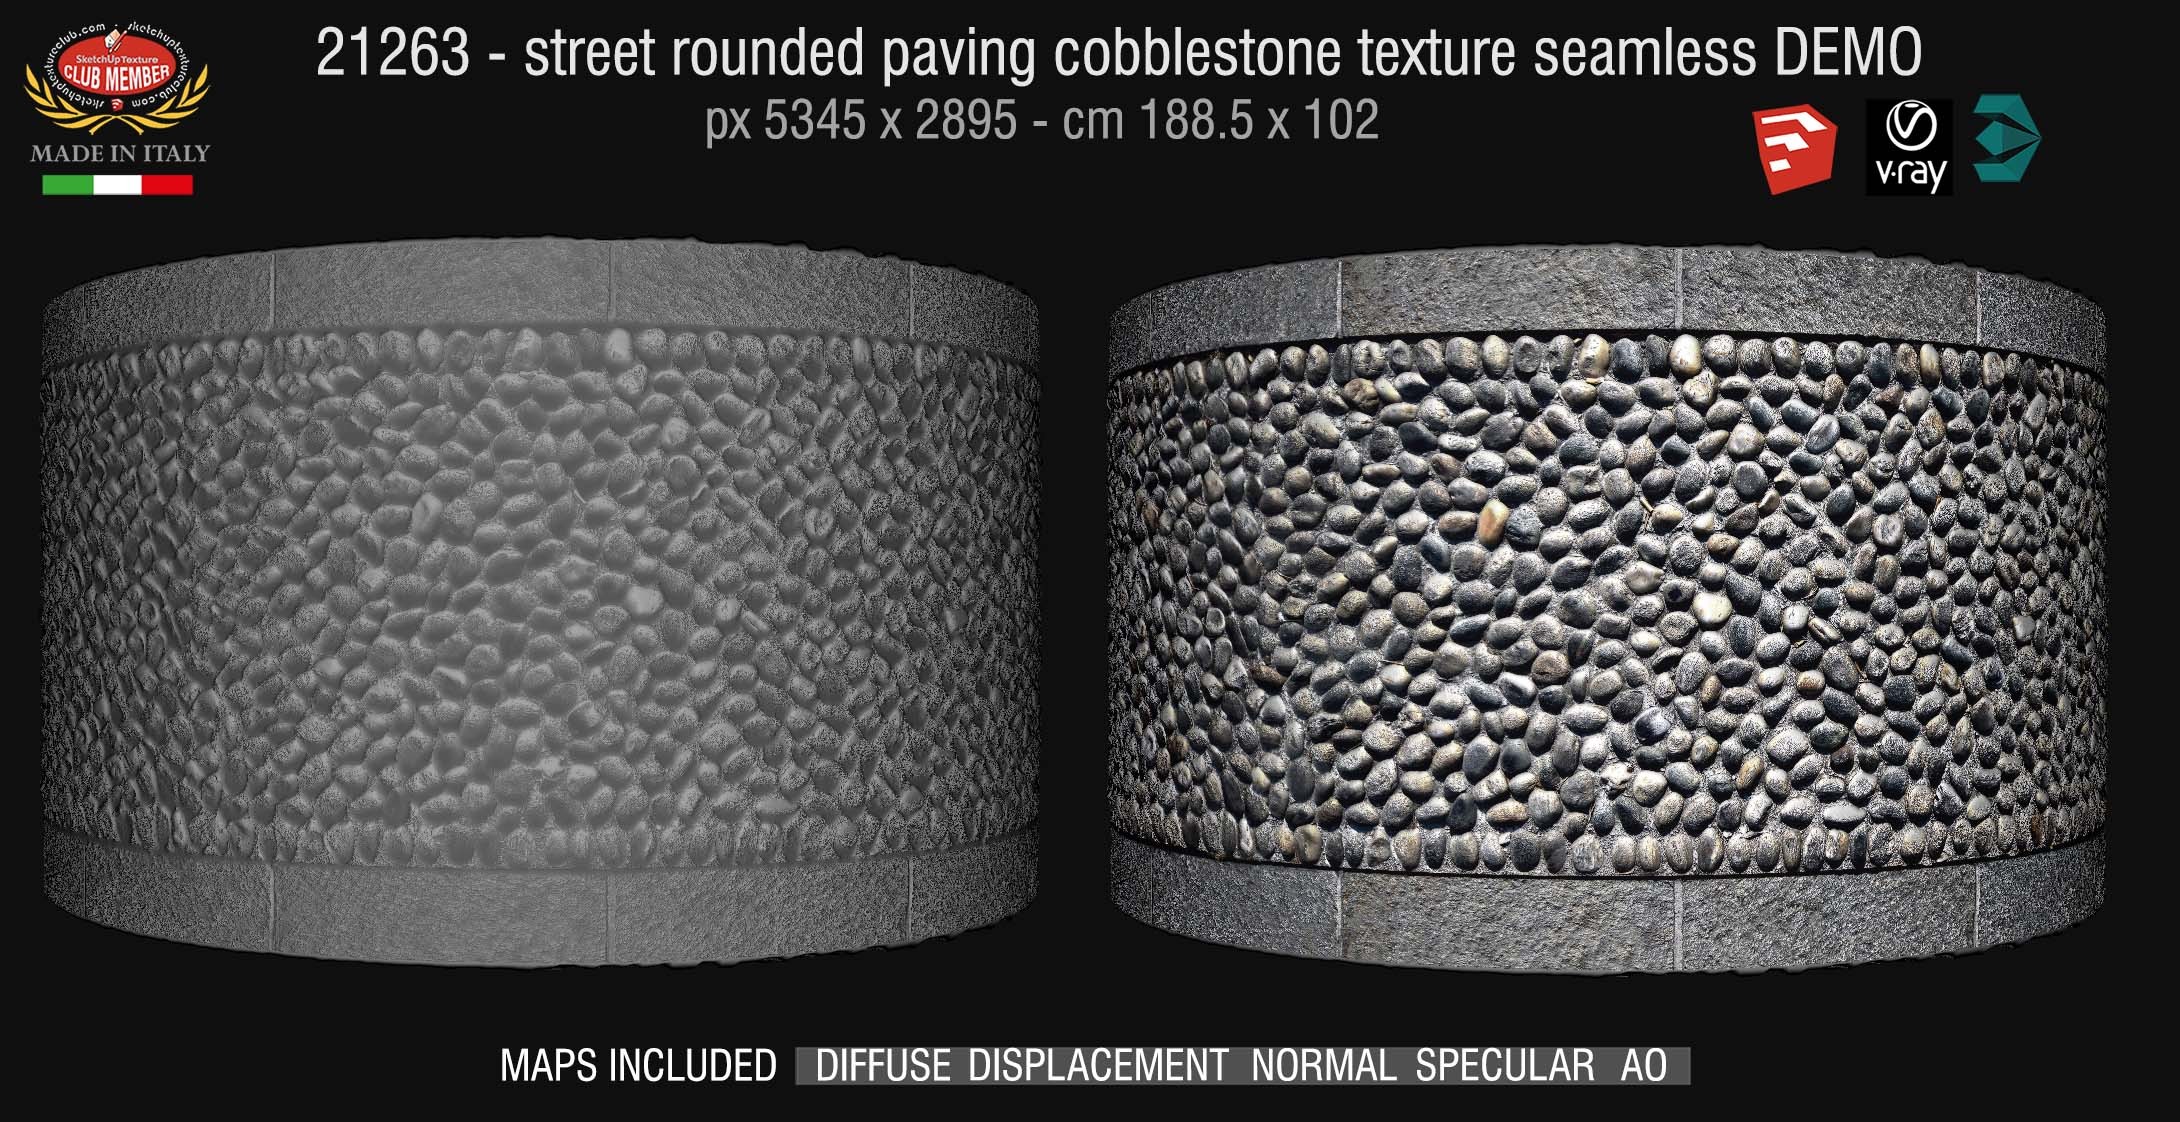 21263 Street paving rounded cobblestone texture + maps DEMO